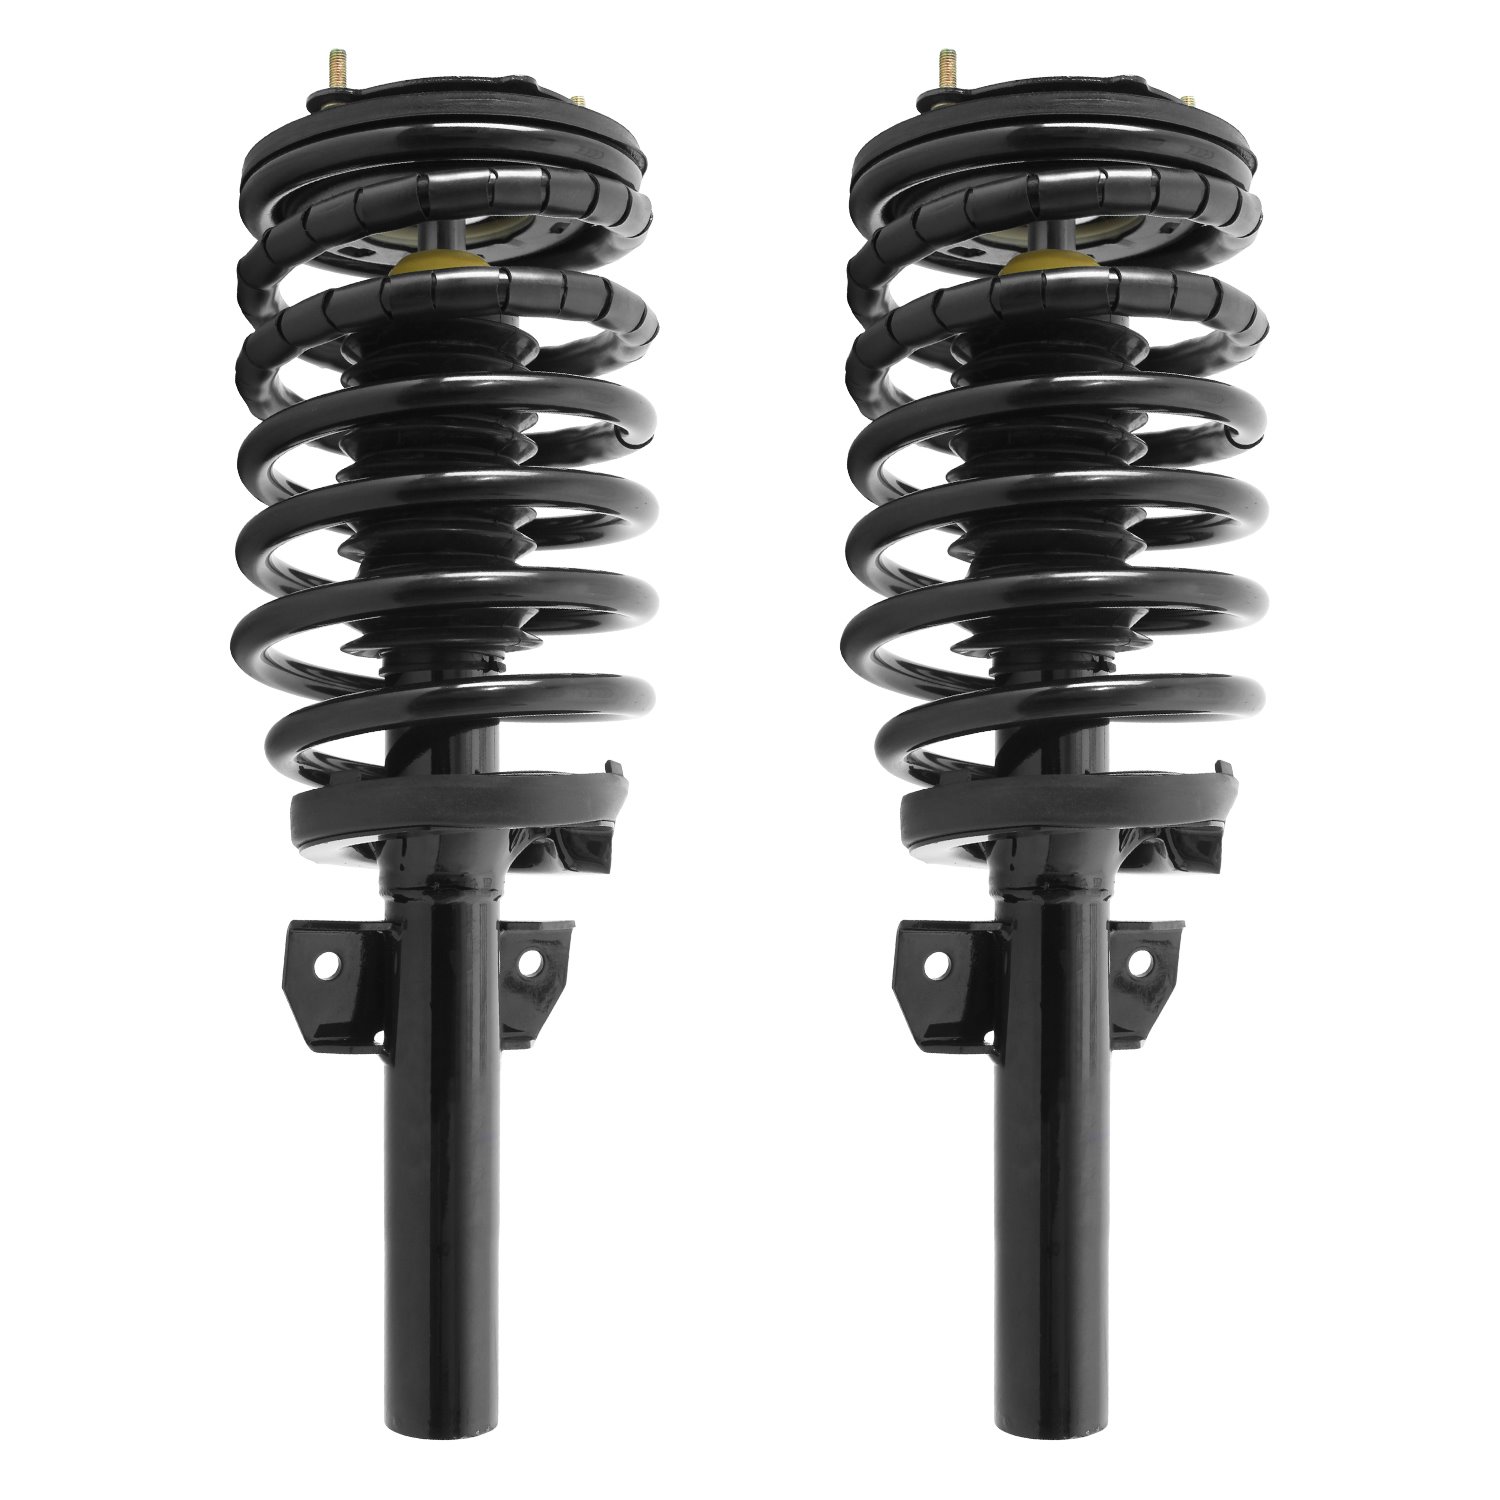 2-11310-001 Suspension Strut & Coil Spring Assembly Set Fits Select Ford Taurus, Mercury Sable